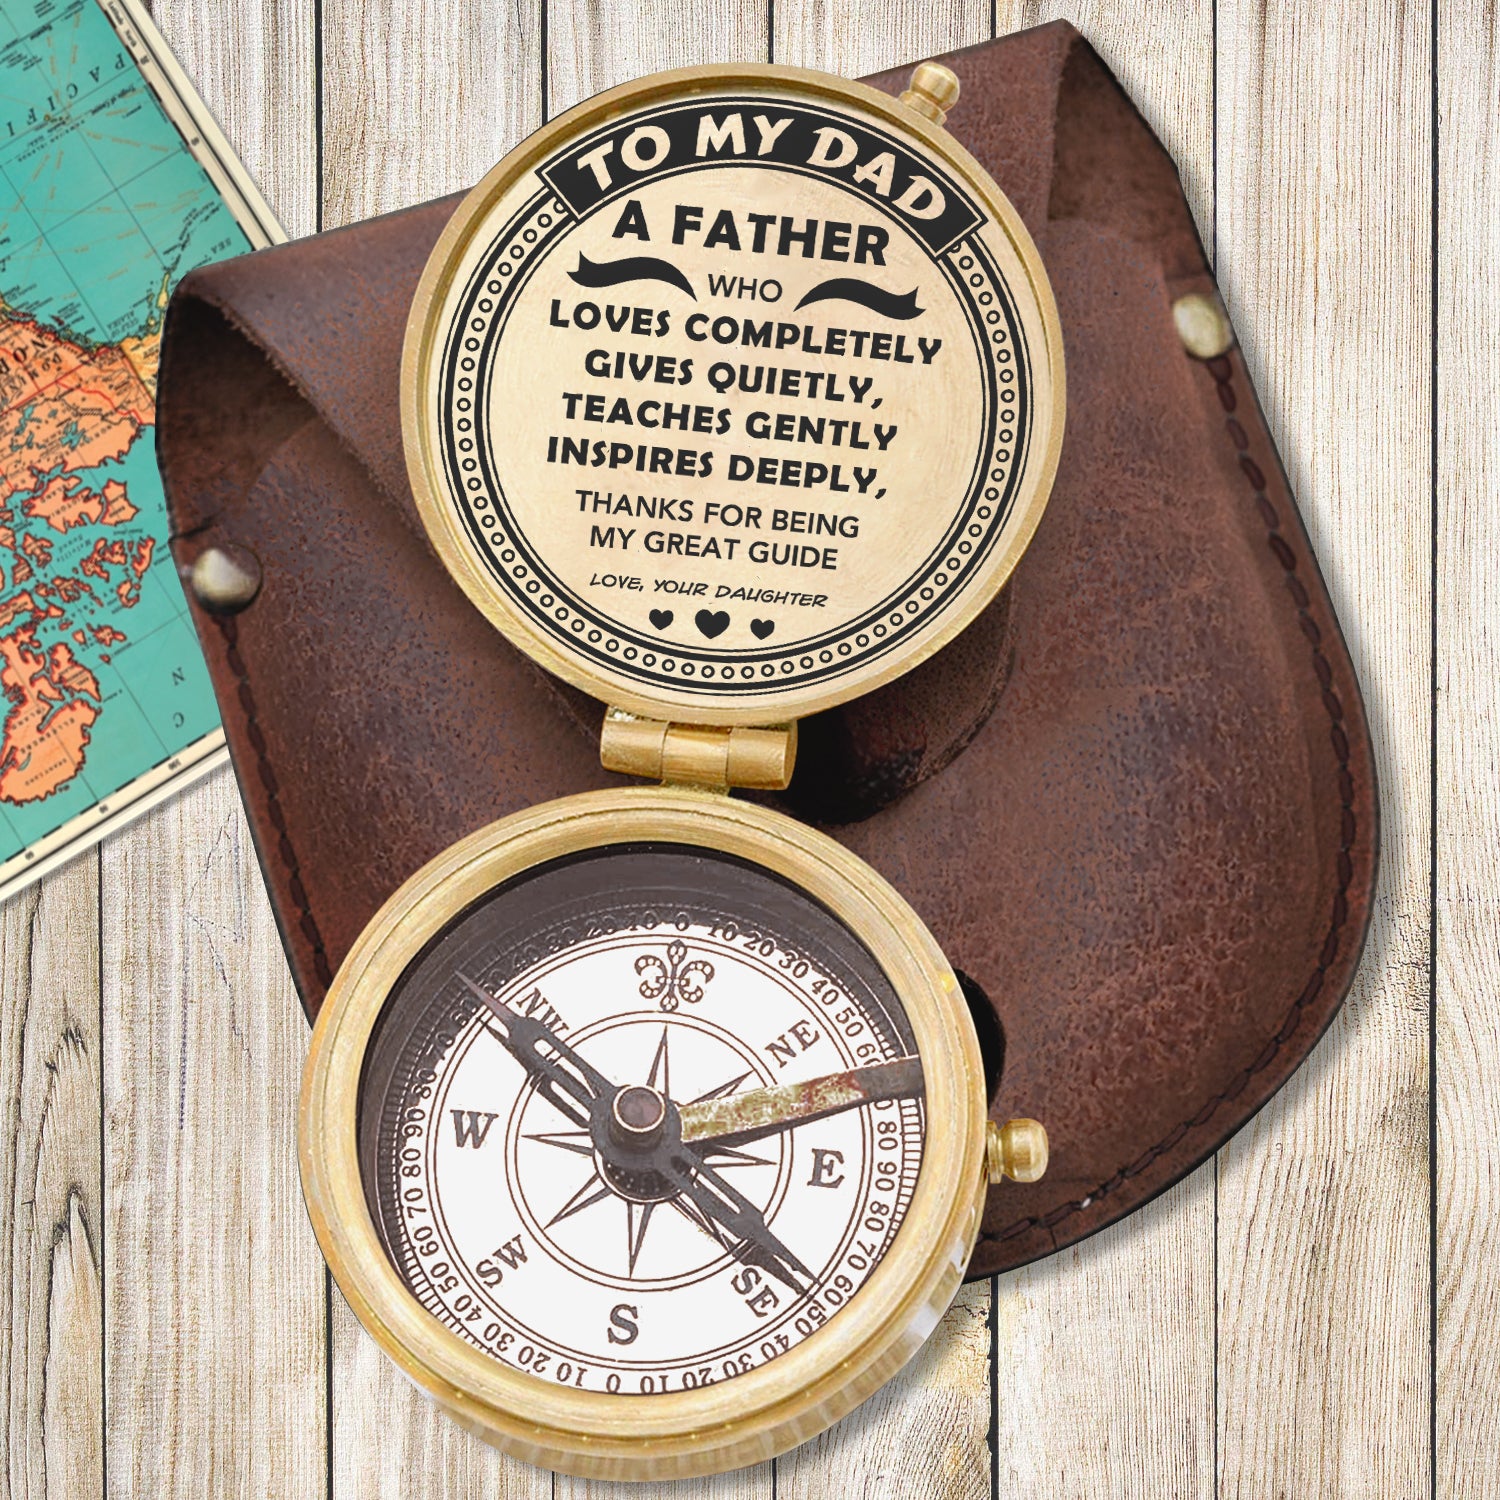 Engraved Compass - Family - From Daughter - To My Dad - Thanks For Being My Great Guide - Ukgpb18002